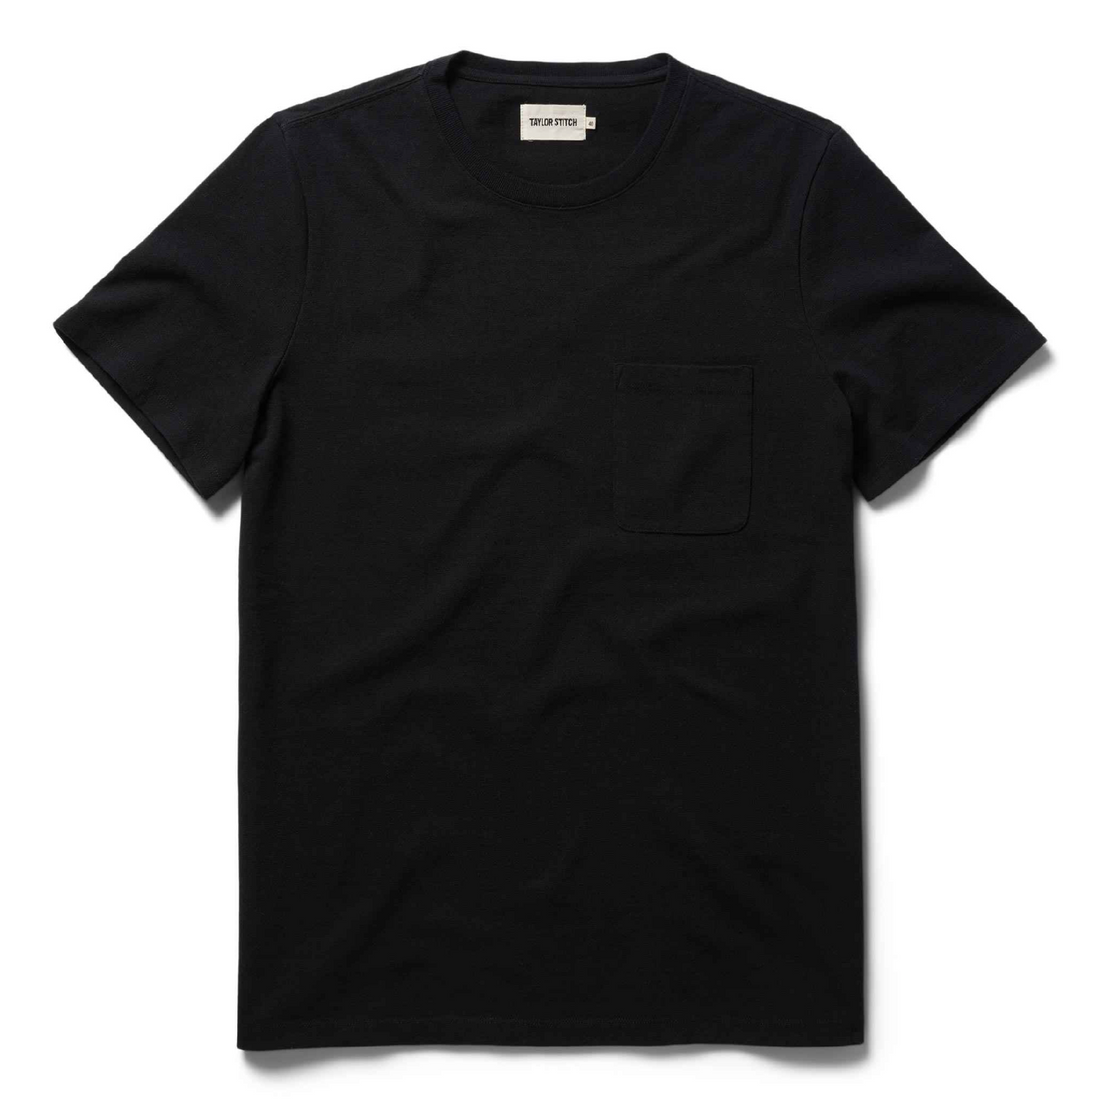 Taylor Stitch - The Heavy Bag Tee in Black